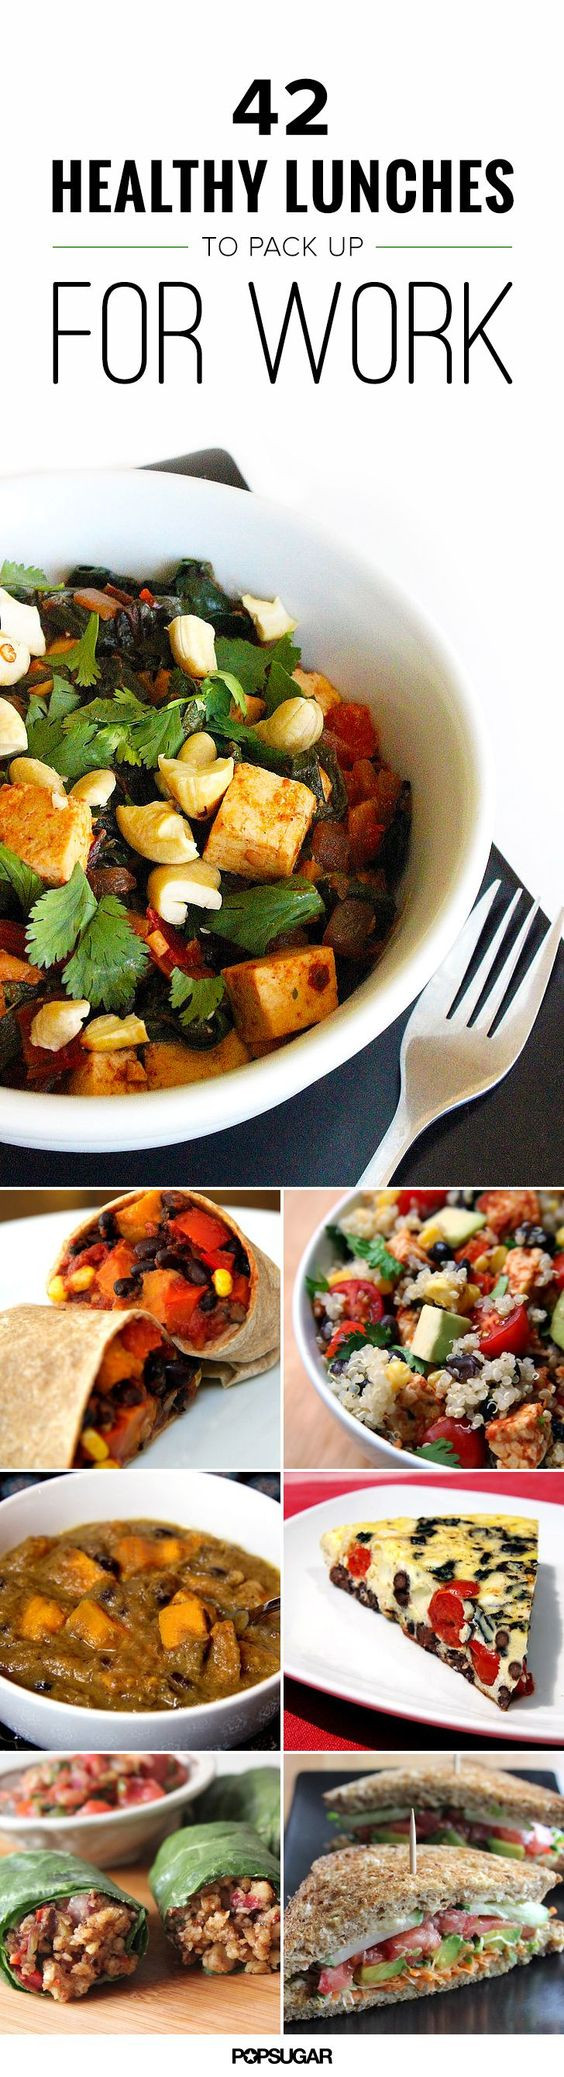 Healthy Lunches To Pack For Work
 Healthy lunches Lunches and Healthy on Pinterest